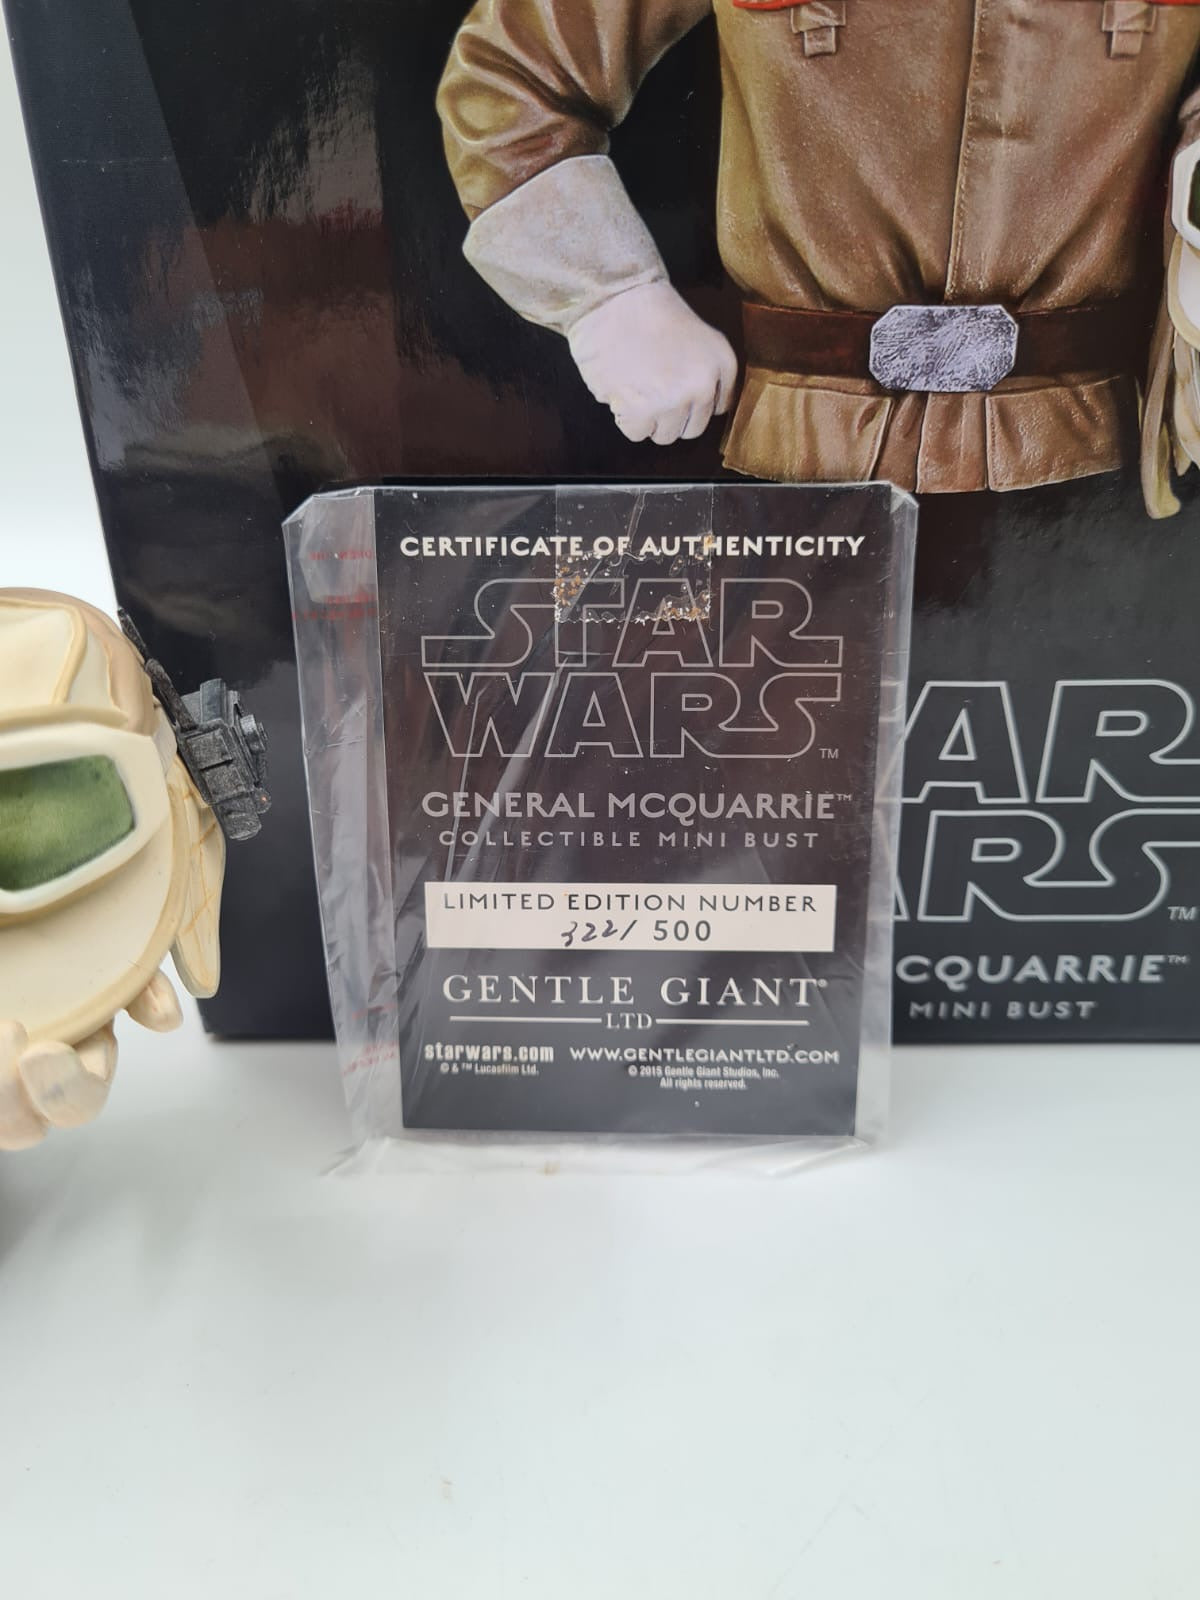 GENERAL MCQUARRIE COLLECTIBLE MINI BUST 2015 CONVENTION EXCLUSIVE GENTLE GIANT